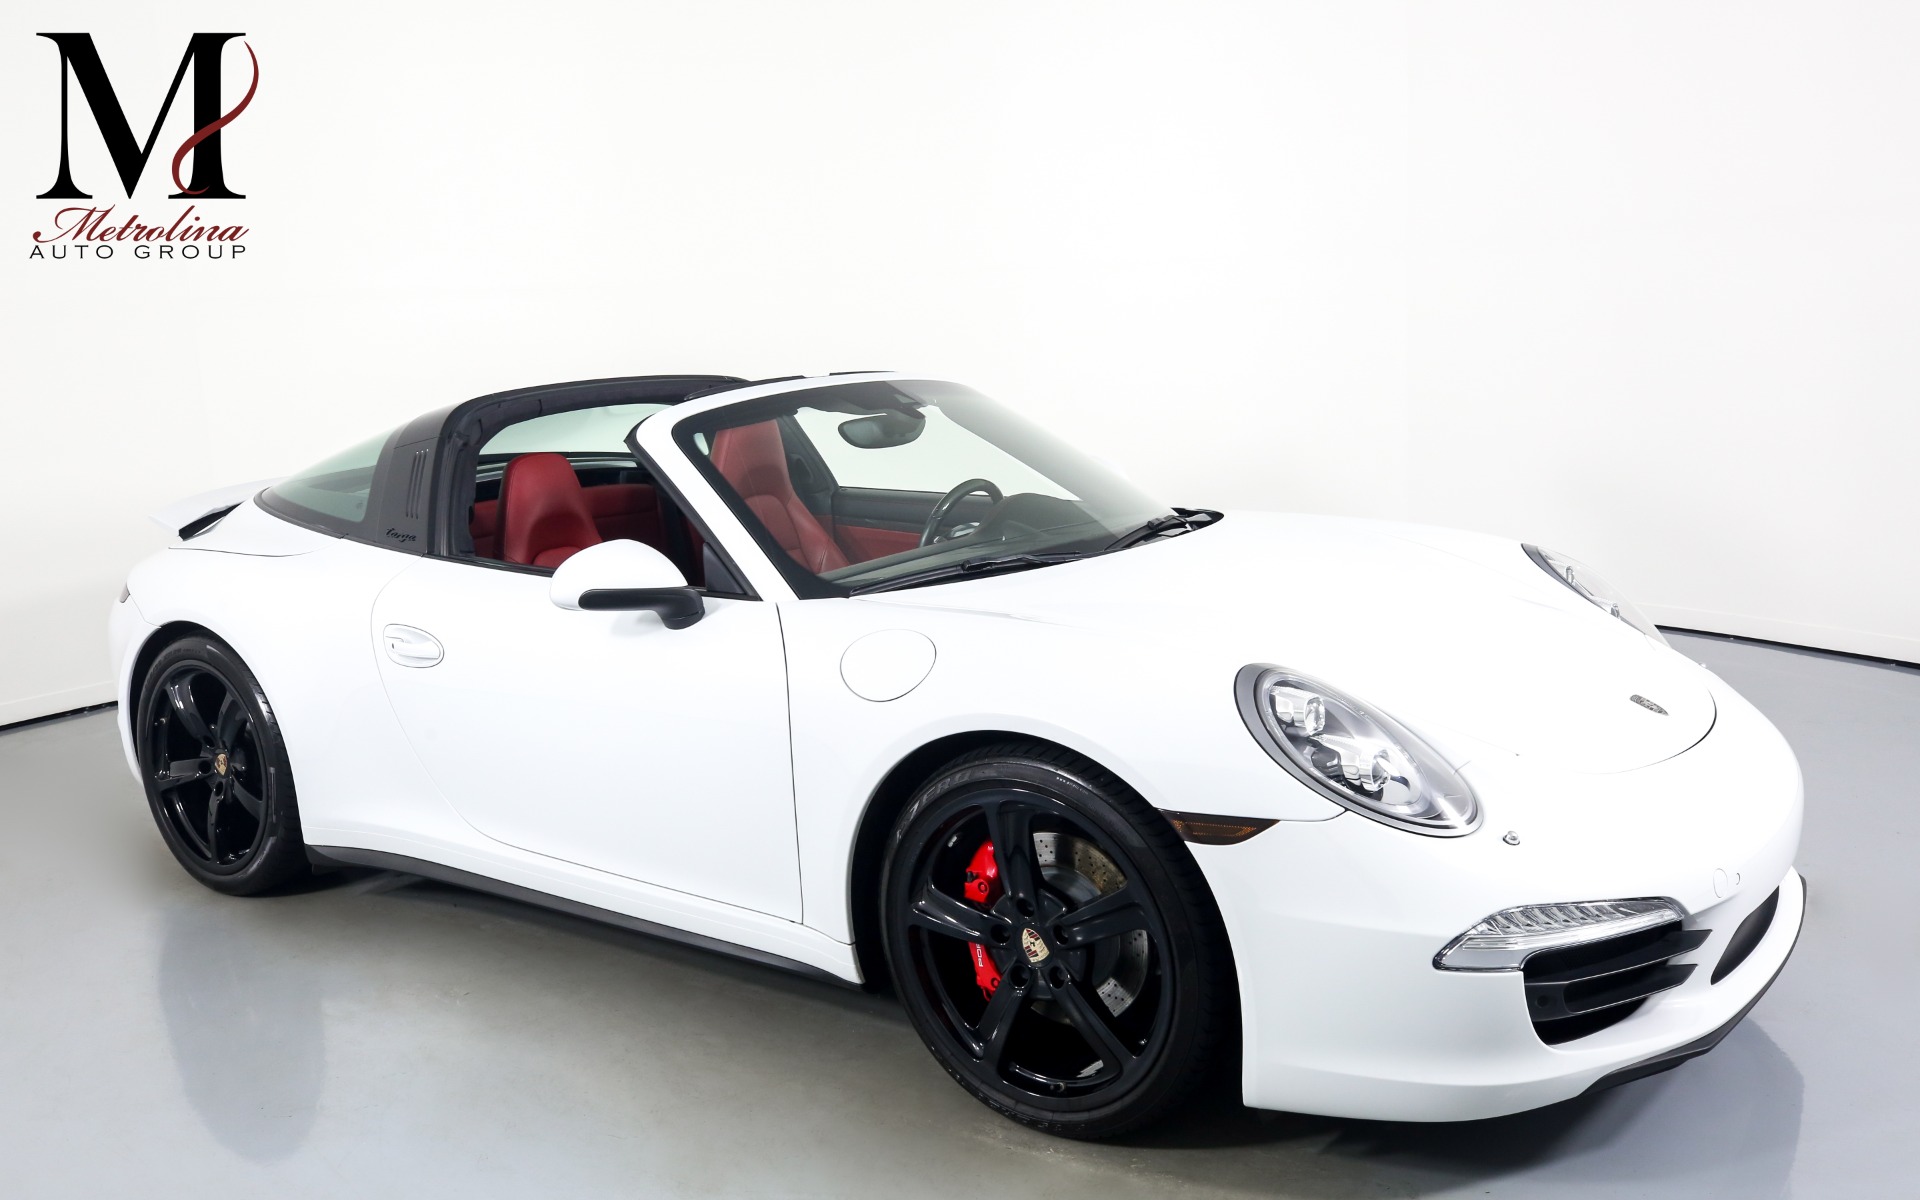 Used 2015 Porsche 911 Targa 4S for sale $112,375 at Metrolina Auto Group in Charlotte NC 28217 - 1